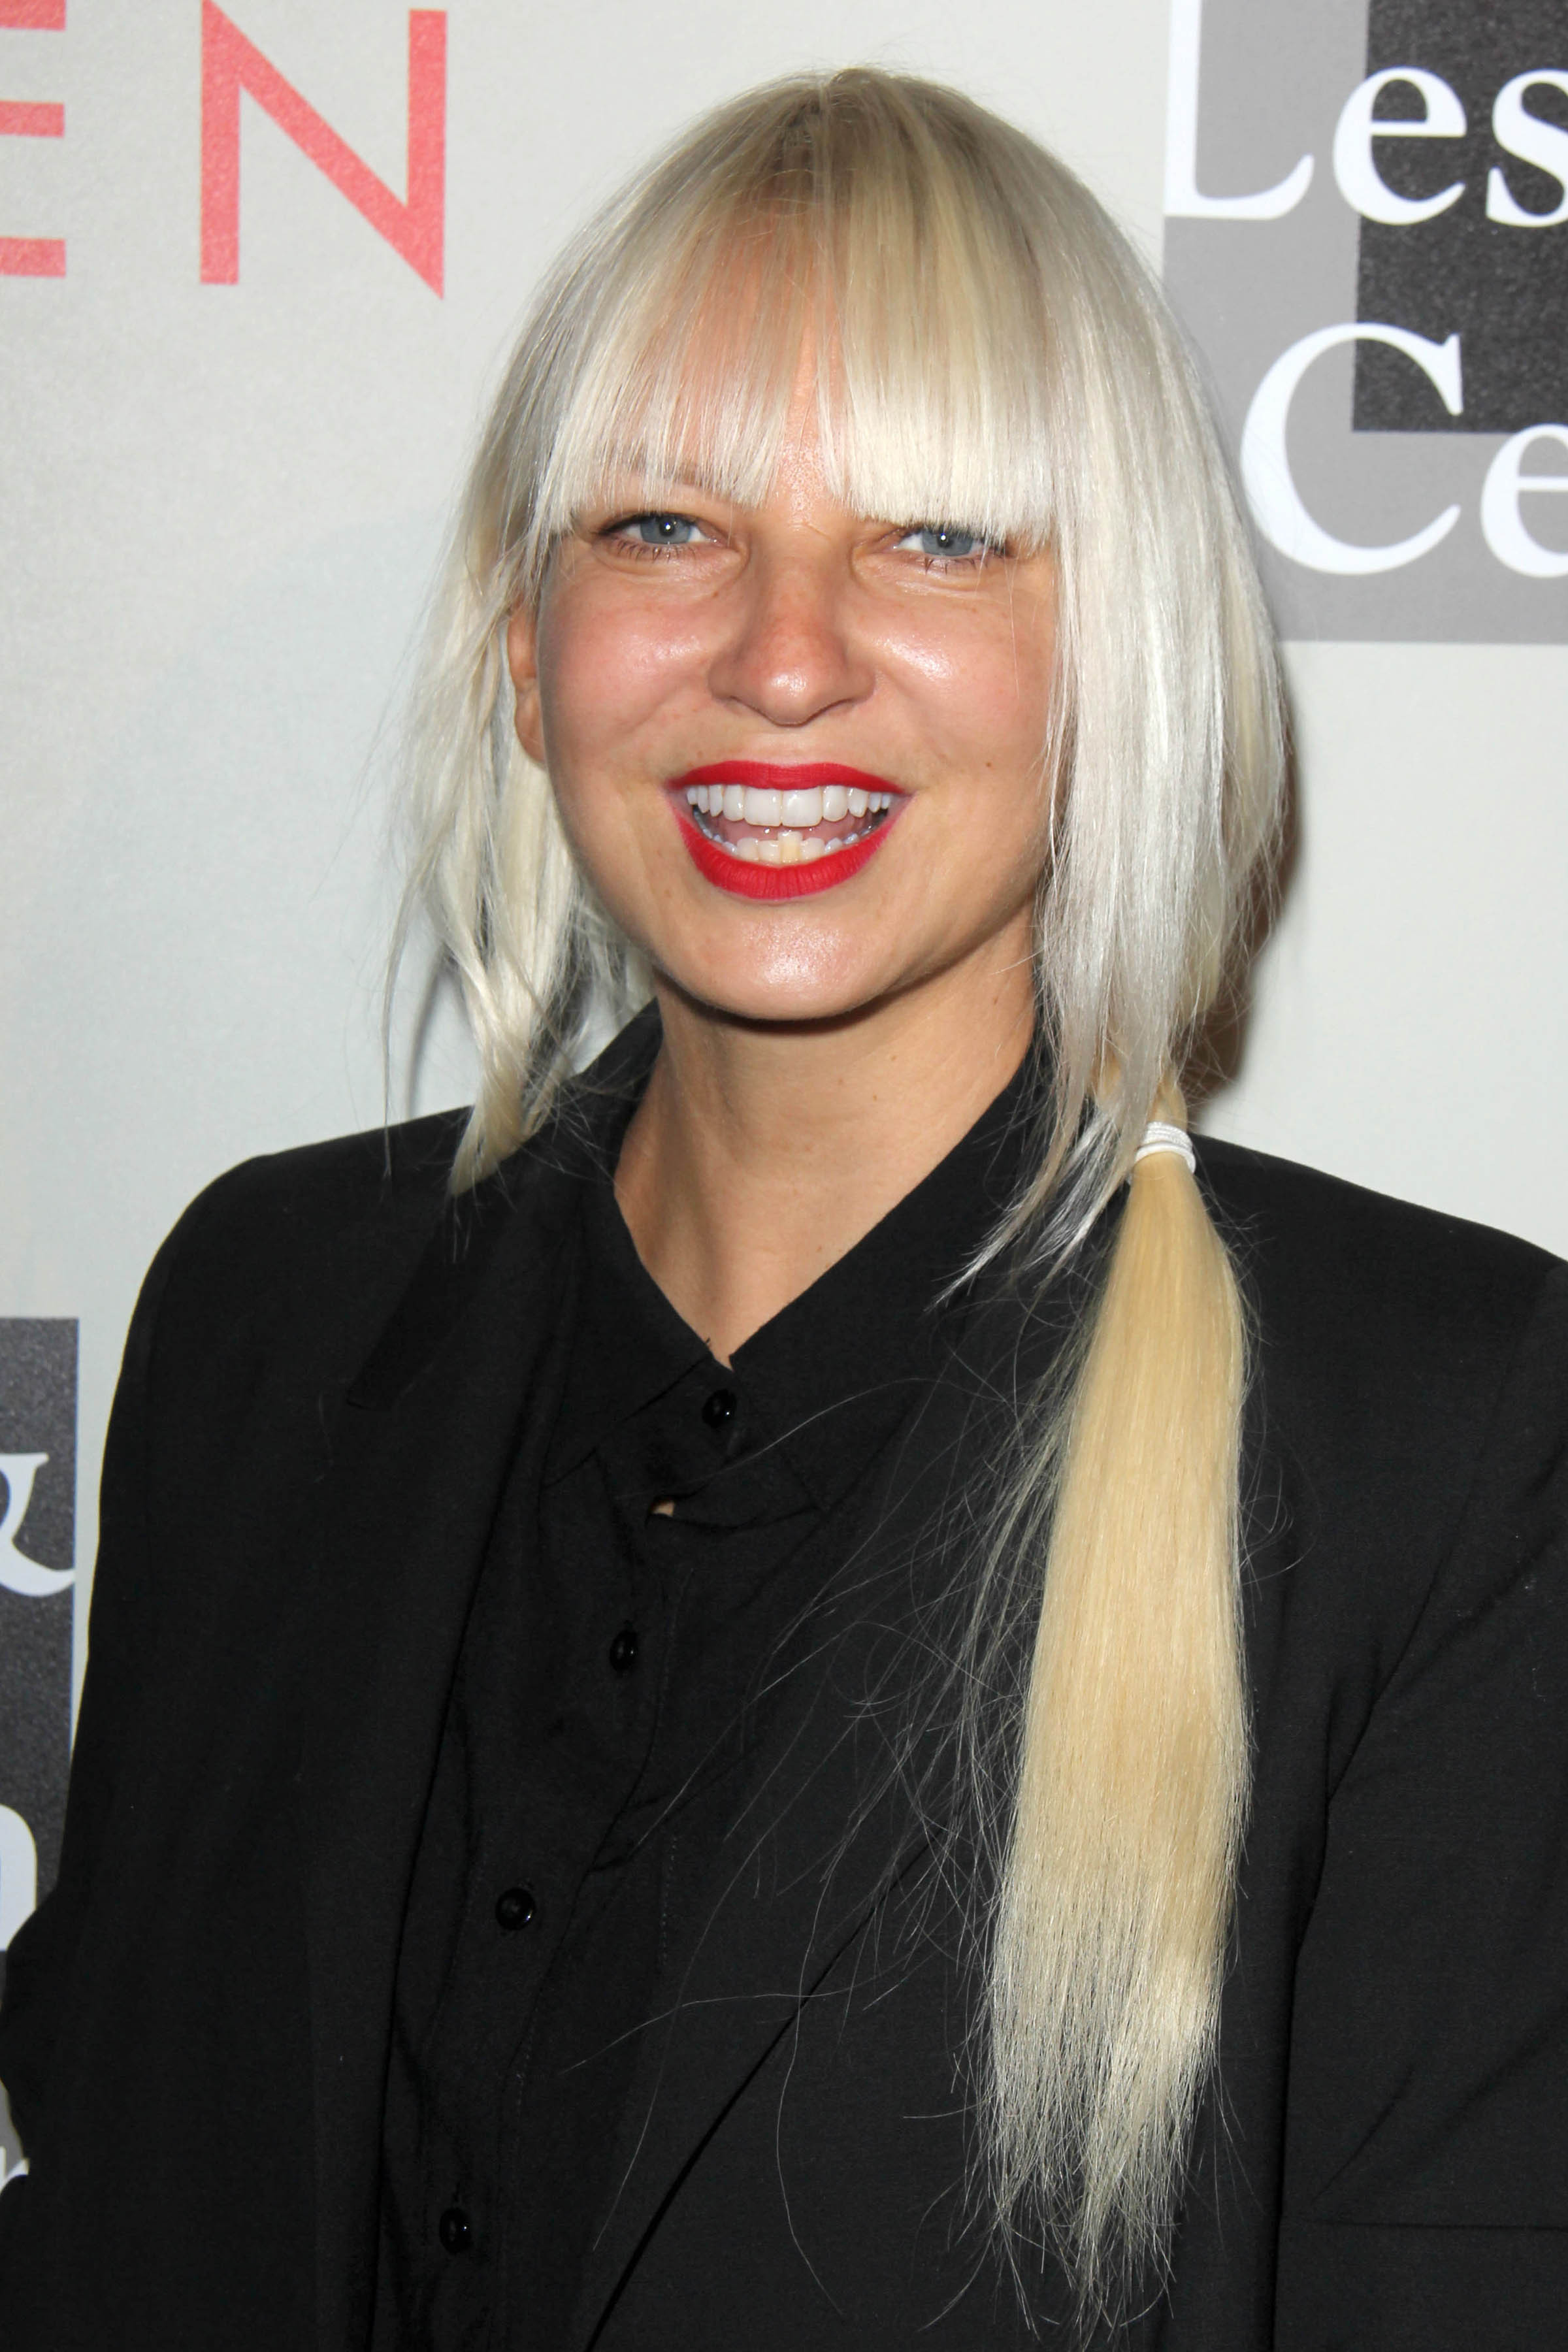 Sia at the L.A. Gay & Lesbian Center's 'An Evening With Women' at Beverly Hilton Hotel on May 10, 2014 in Beverly Hills, CA.